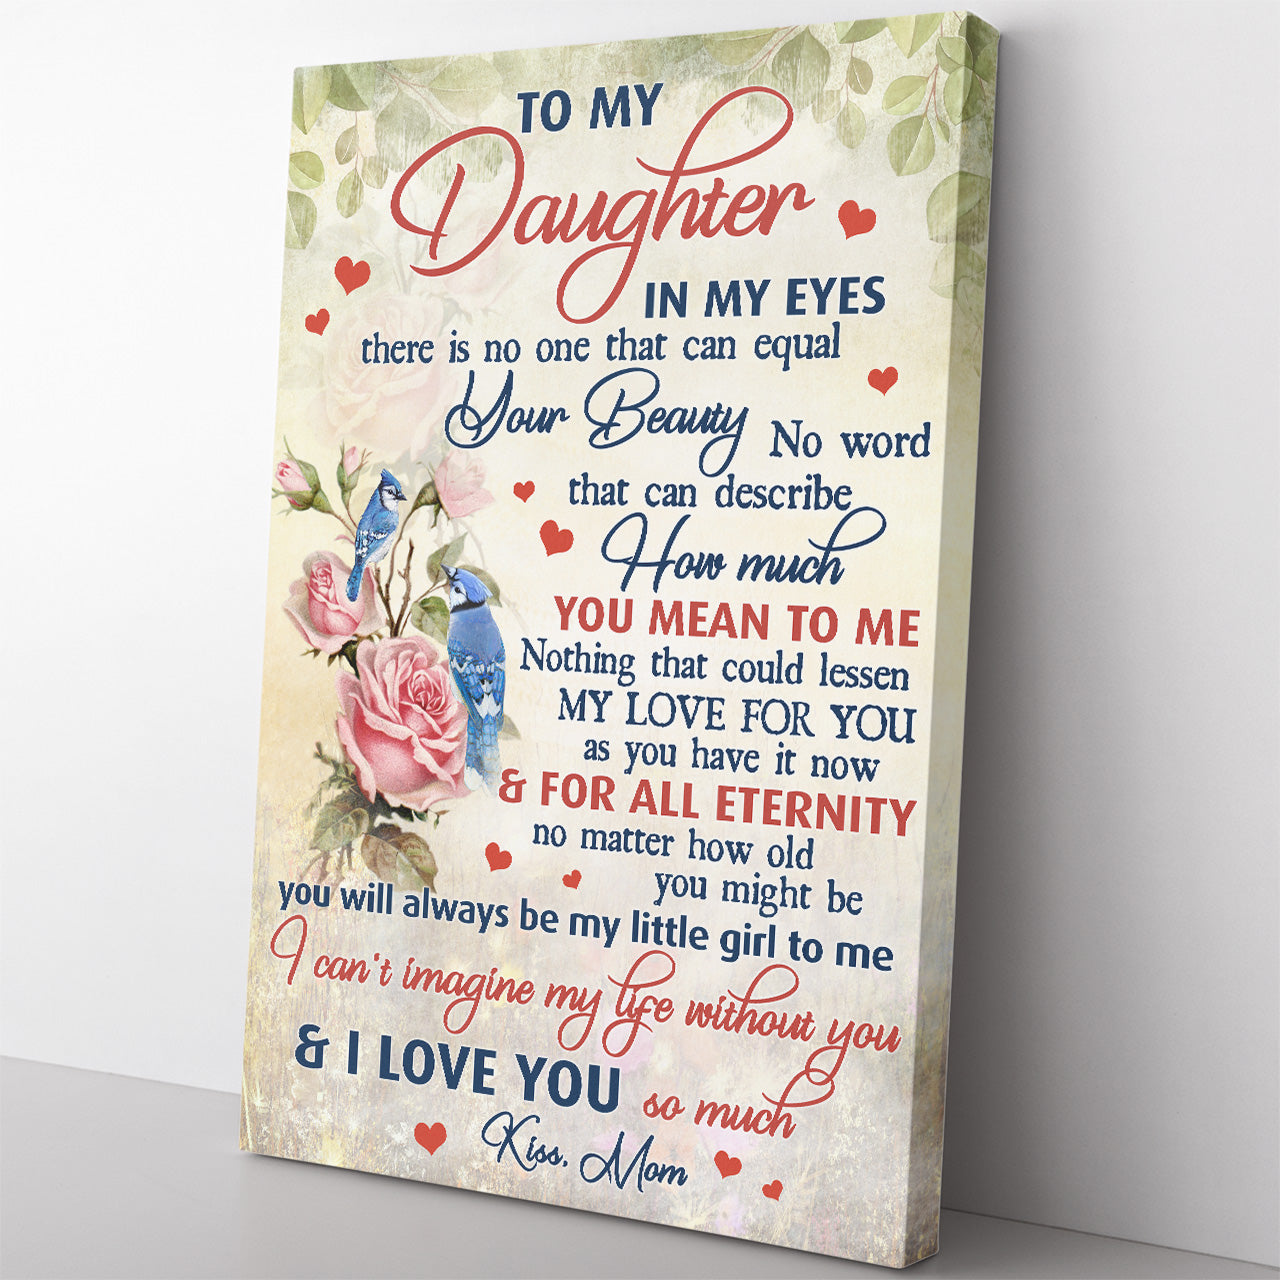 Floral Canvas Gift from Mom to Daughter, How Much You Mean to Me Canvas for Daughter, Motivational Thoughtful Sentimental Canvas for Daughter